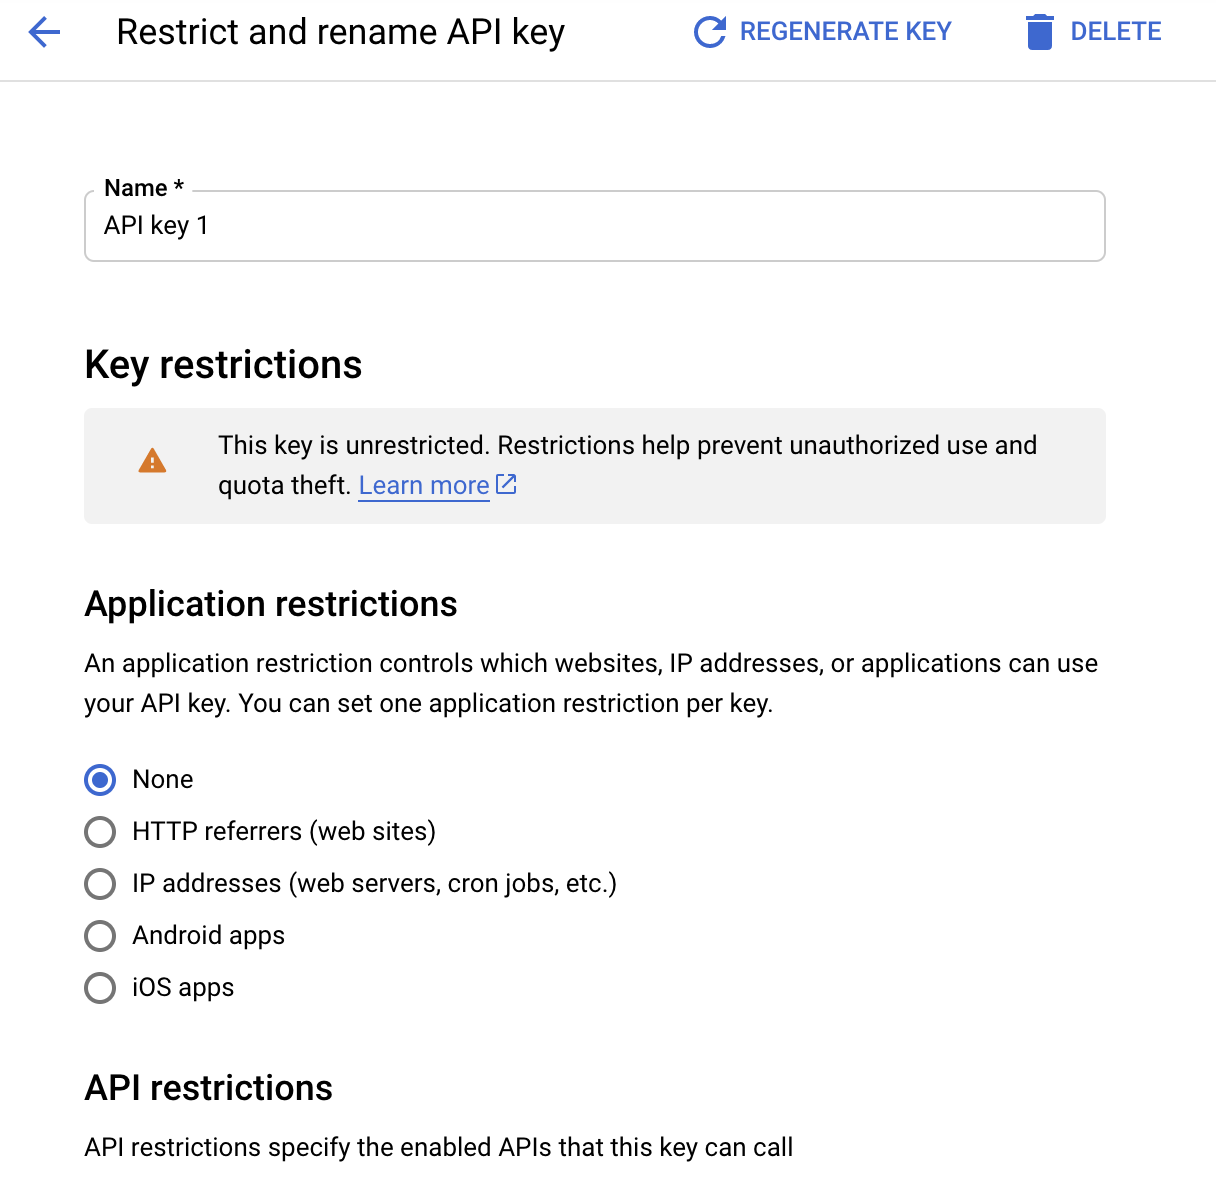  Preview of a API key being restricted 